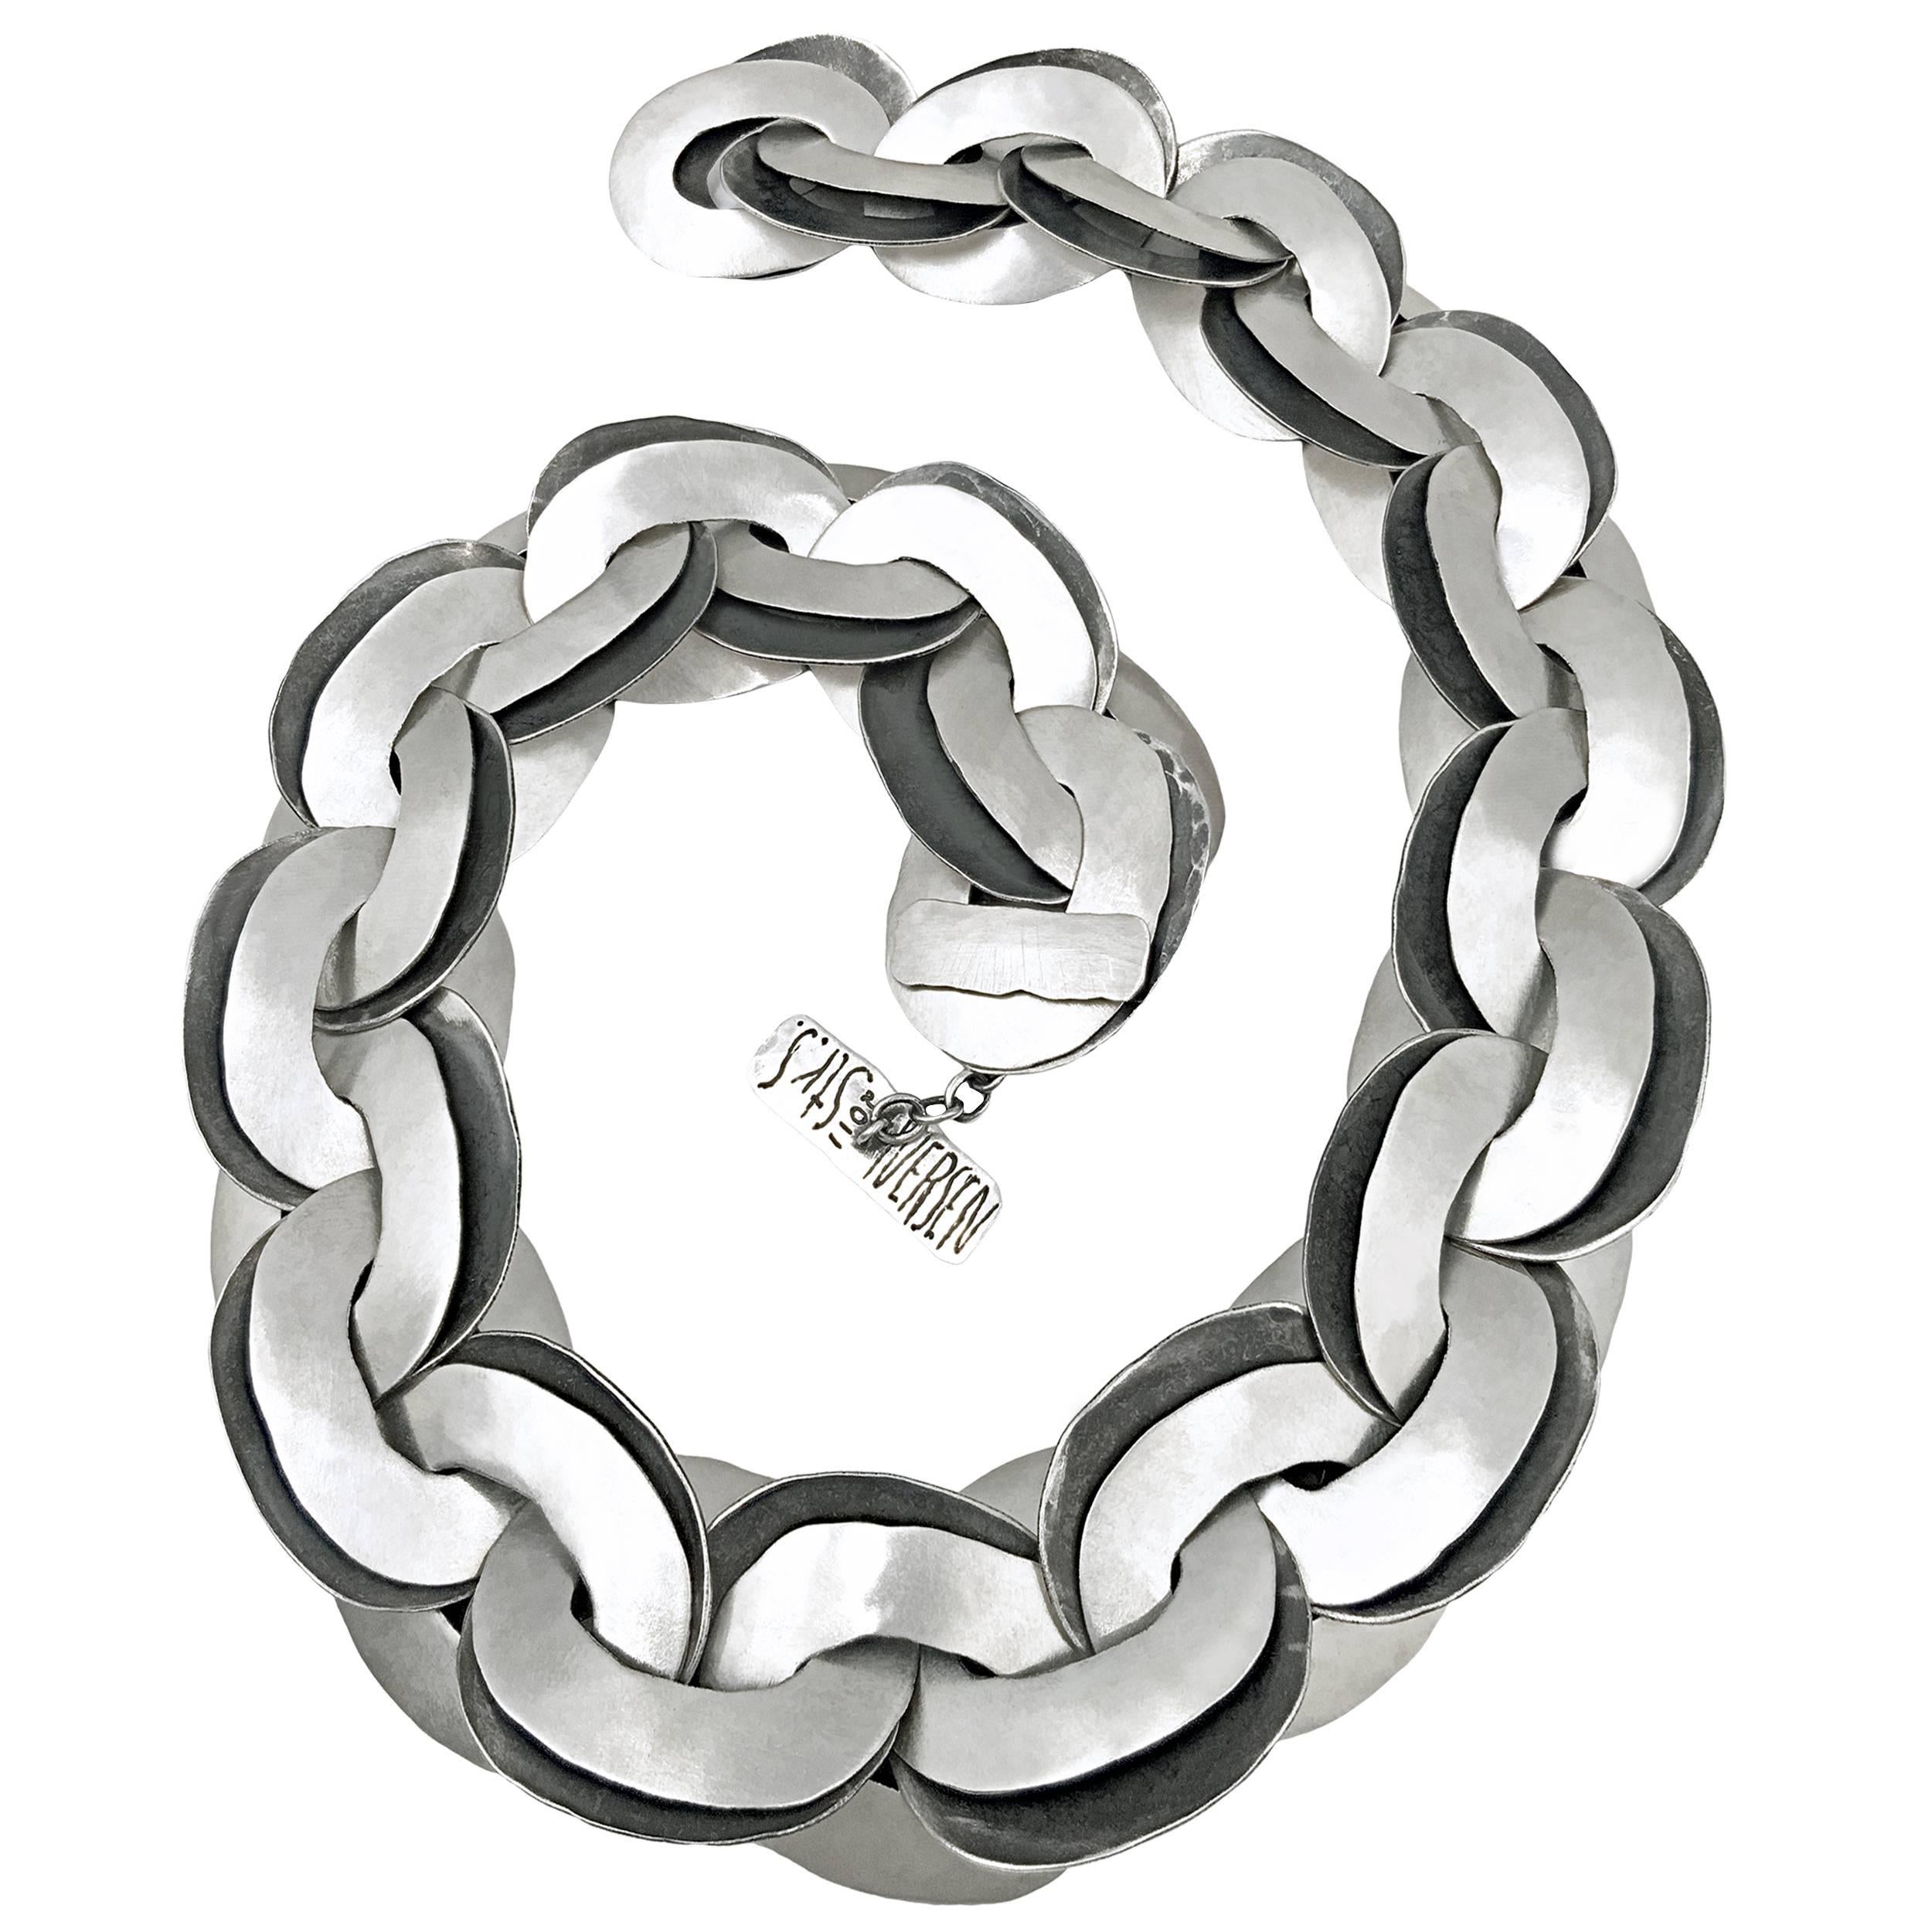 John Iversen One of a Kind Hammered Silver Double Link Chain Necklace